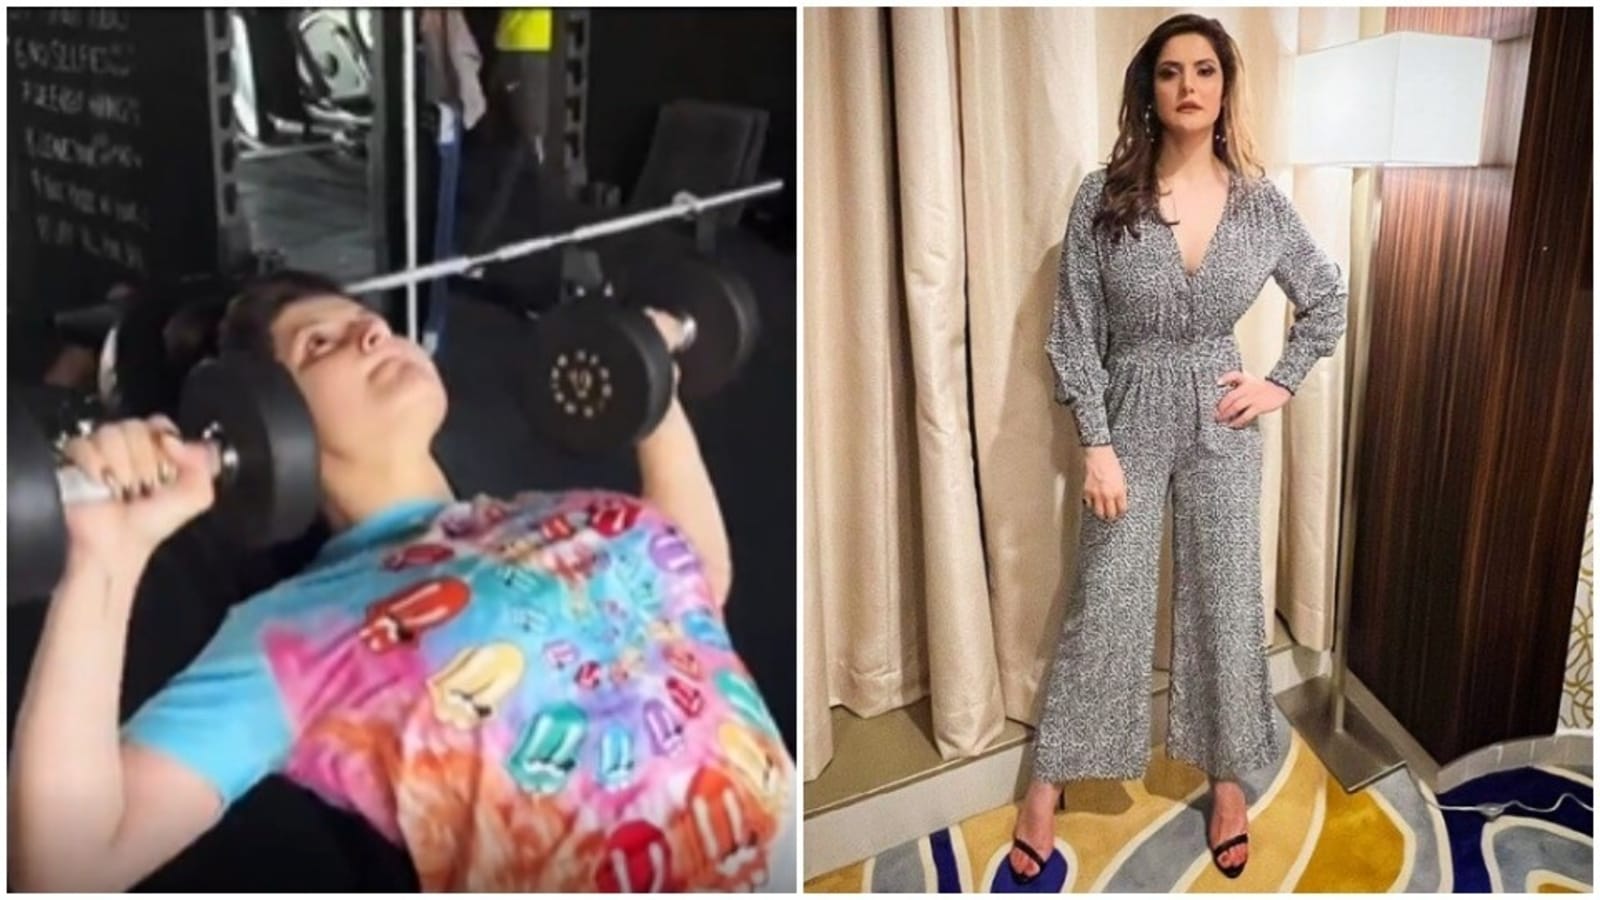 Zareen Khanxxx Video - Zareen Khan is 'starting the week with endorphins.' Here's how she did it |  Health - Hindustan Times